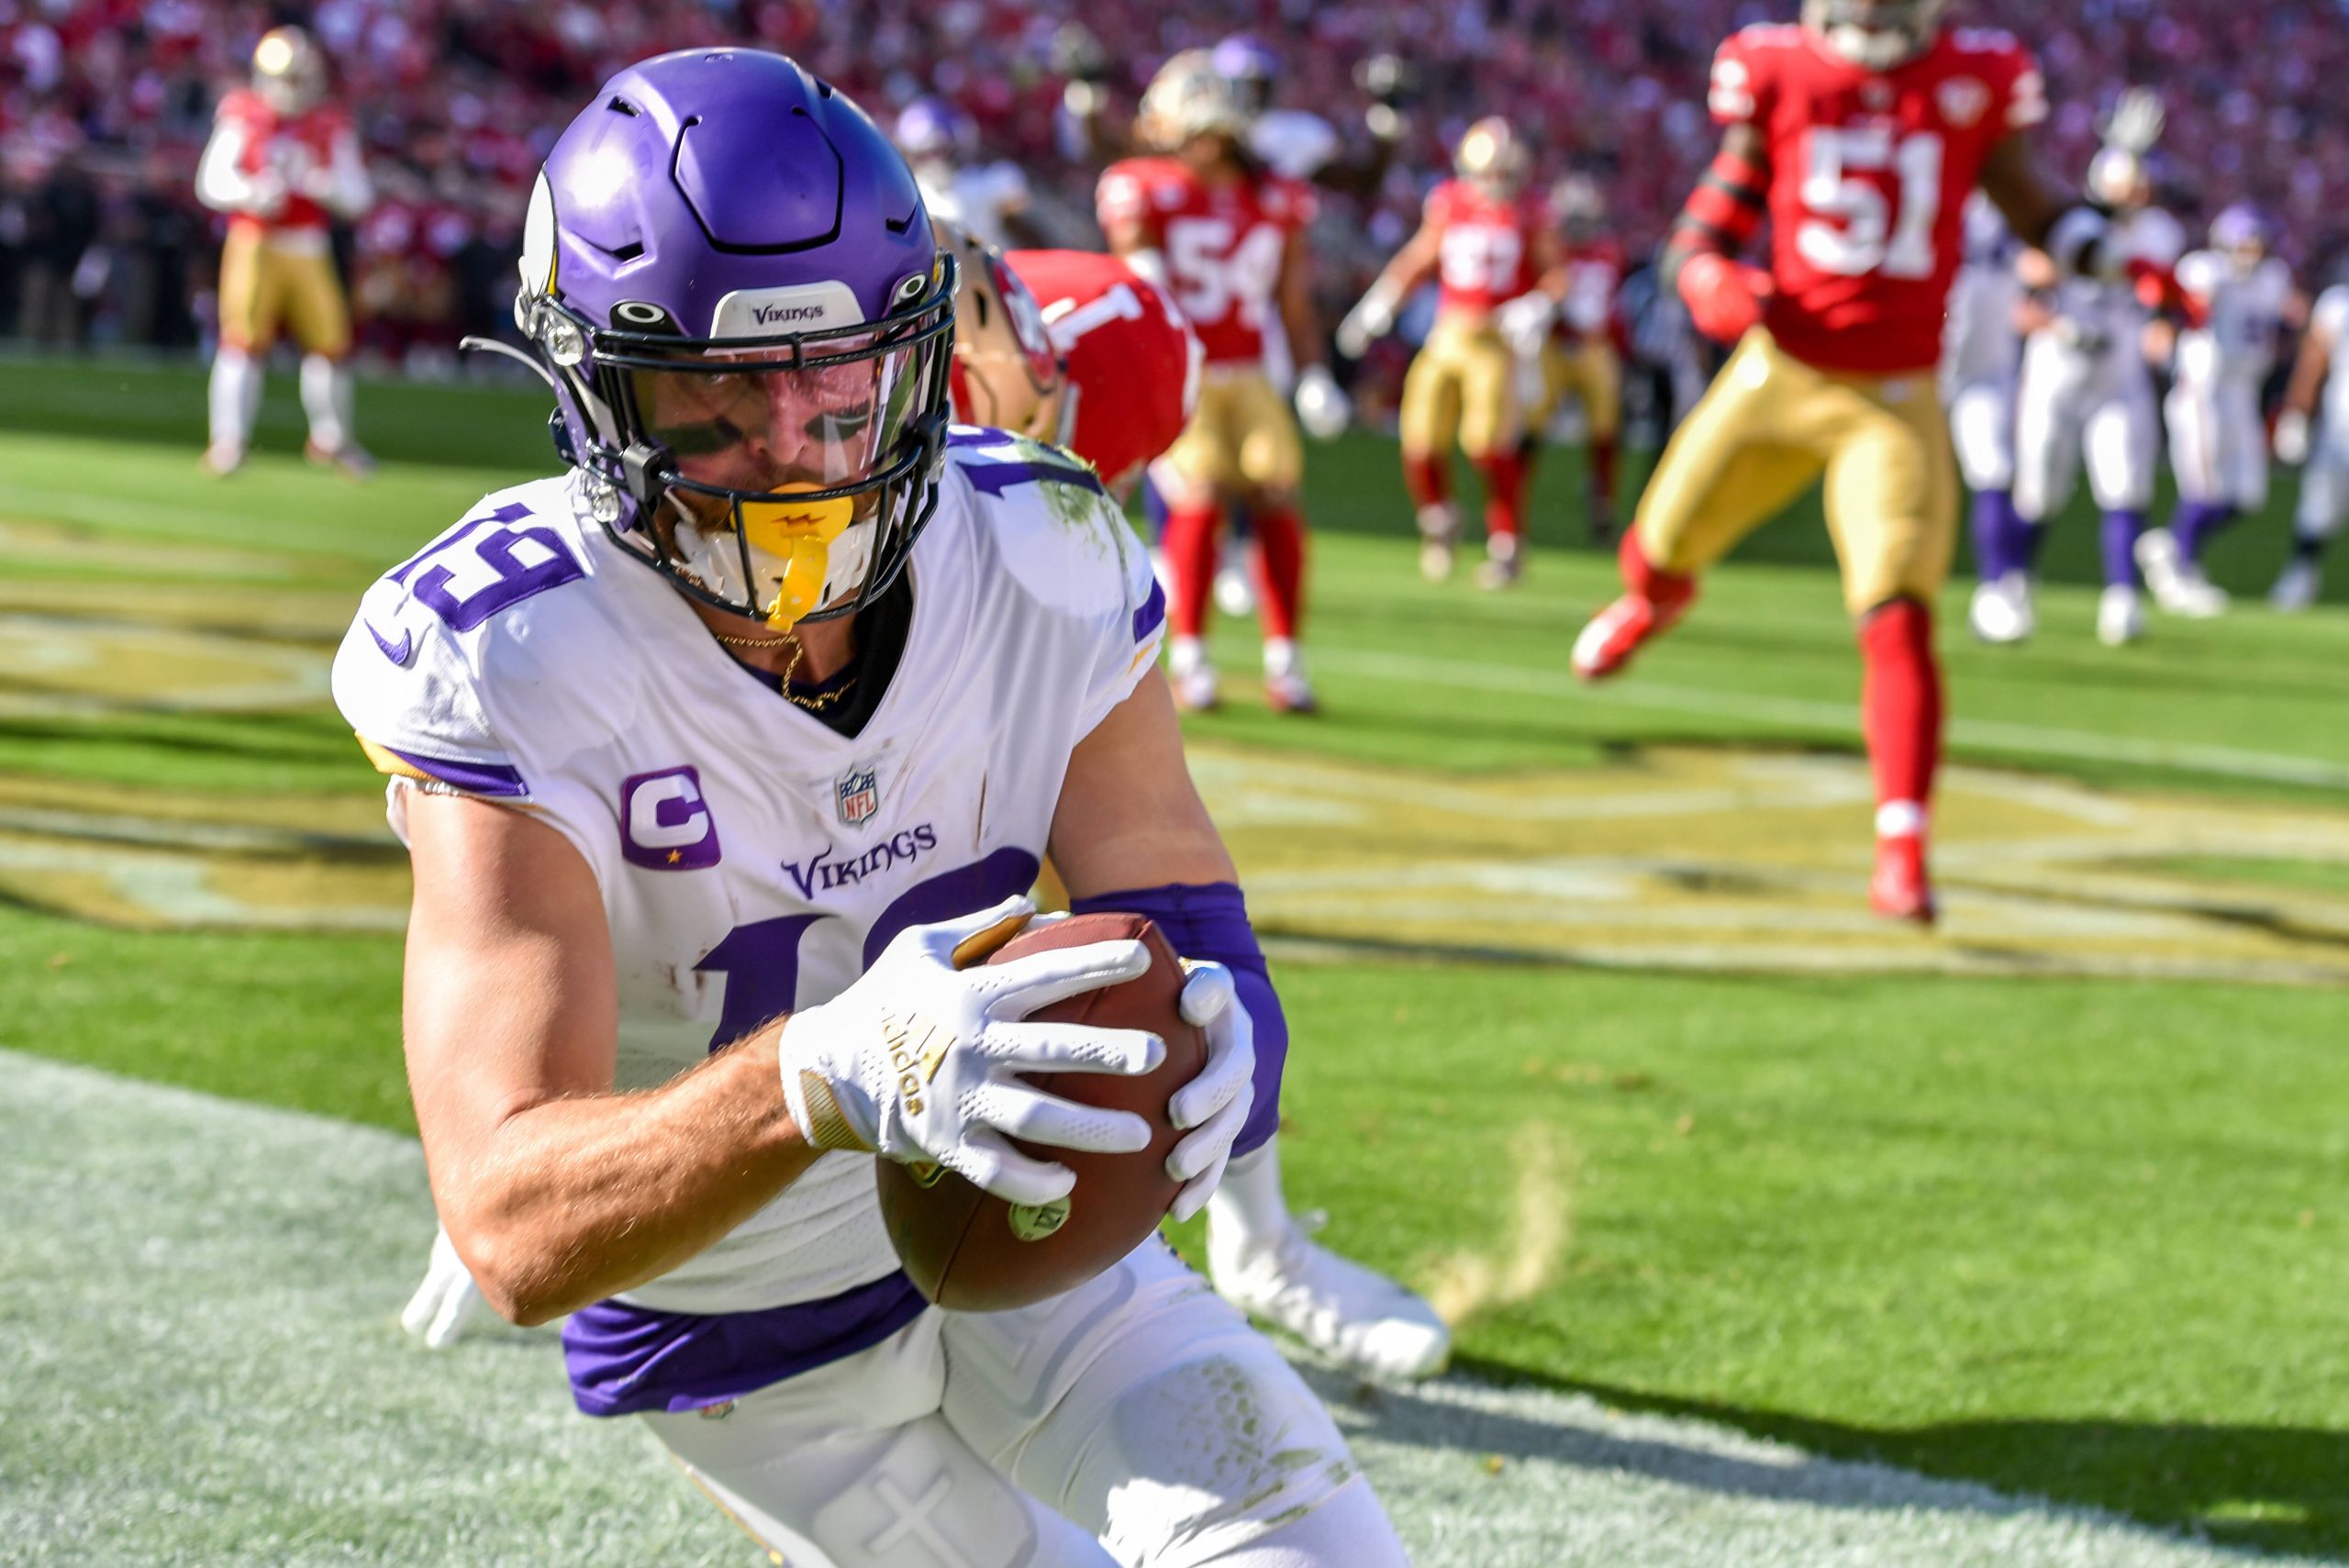 SANTA CLARA, CA - NOVEMBER 28: Minnesota Vikings wide receiver Adam Thielen 19 comes out of the endzone after scoring a TD during the game between the Minnesota Vikings and the San Francisco 49ers on Sunday, November 28, 2021 at Levi s Stadium in Santa Clara, California. Photo by Douglas Stringer/Icon Sportswire NFL, American Football Herren, USA NOV 28 Vikings at 49ers Icon211128004